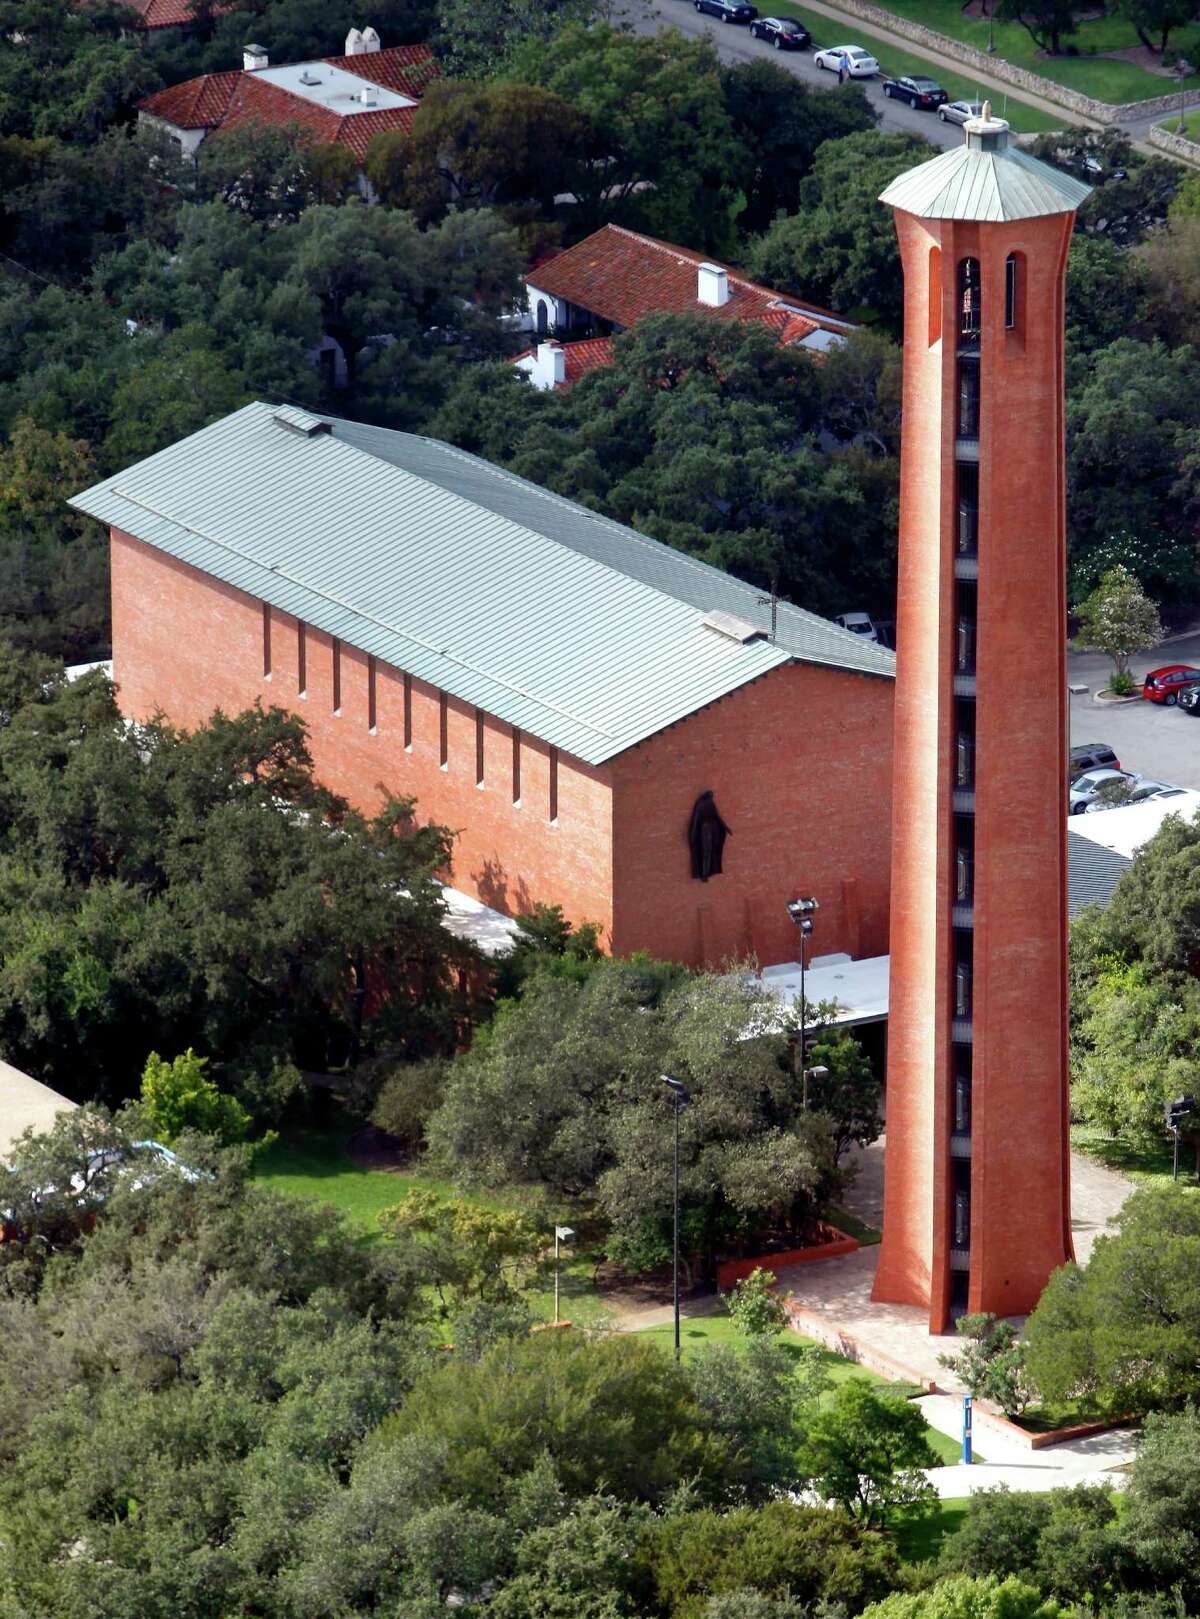 Trinity University's Murchison Tower is seen in this Oct. 25, 2012 aerial photo as it stands in front of Parker Chapel.